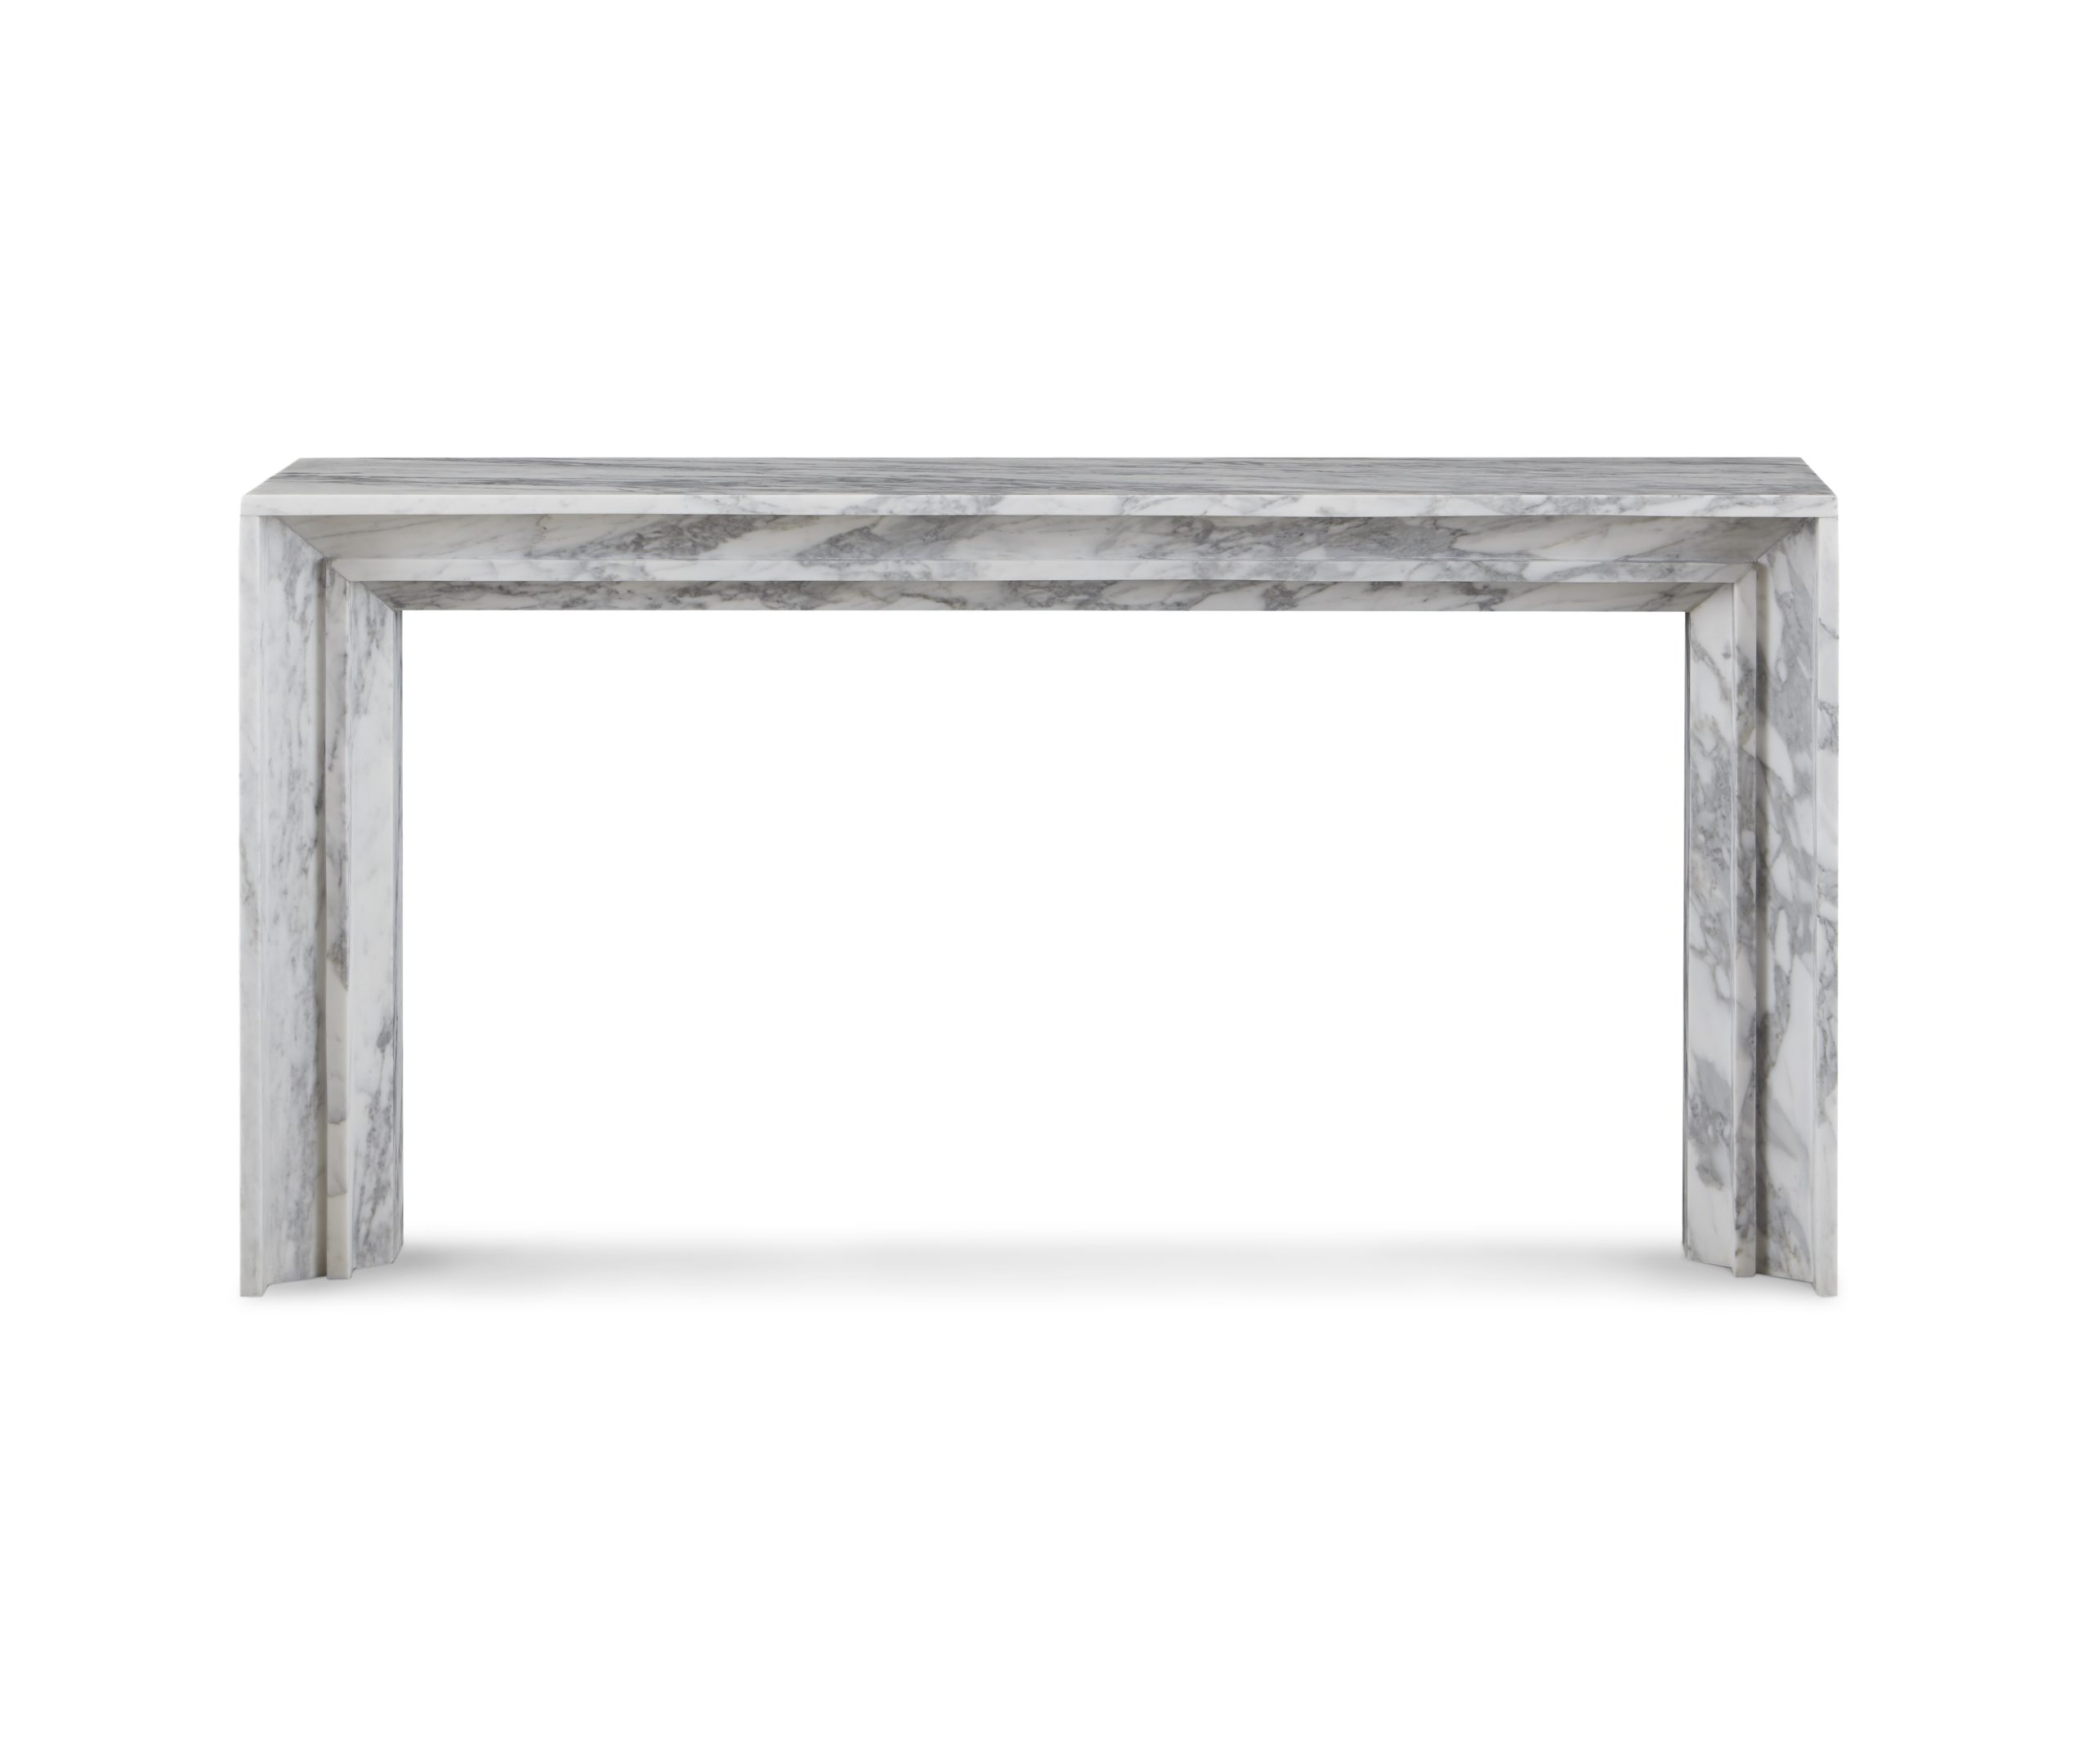 Baker_products_WNWN_angelo_console_BAA3063_FRONT-scaled-2